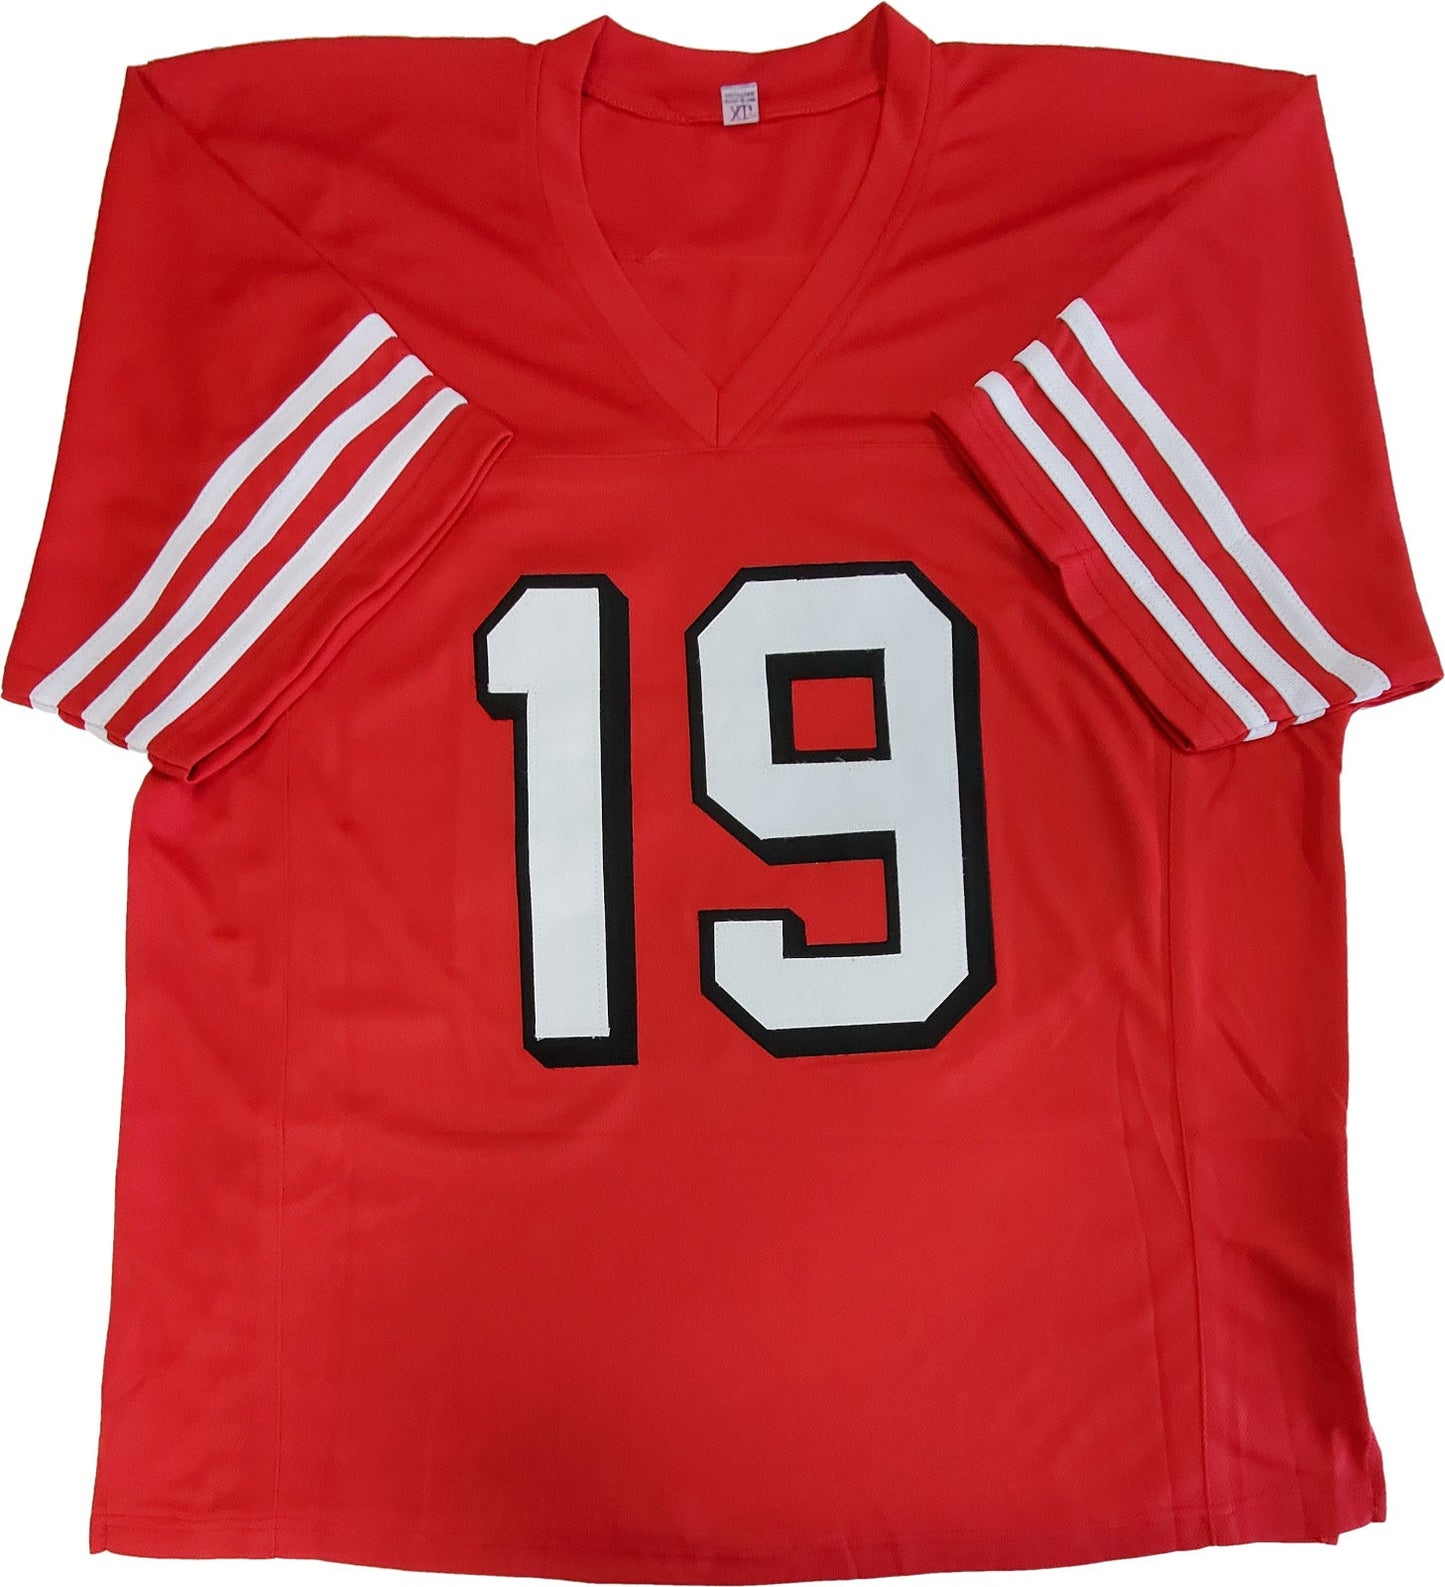 49ers real jersey